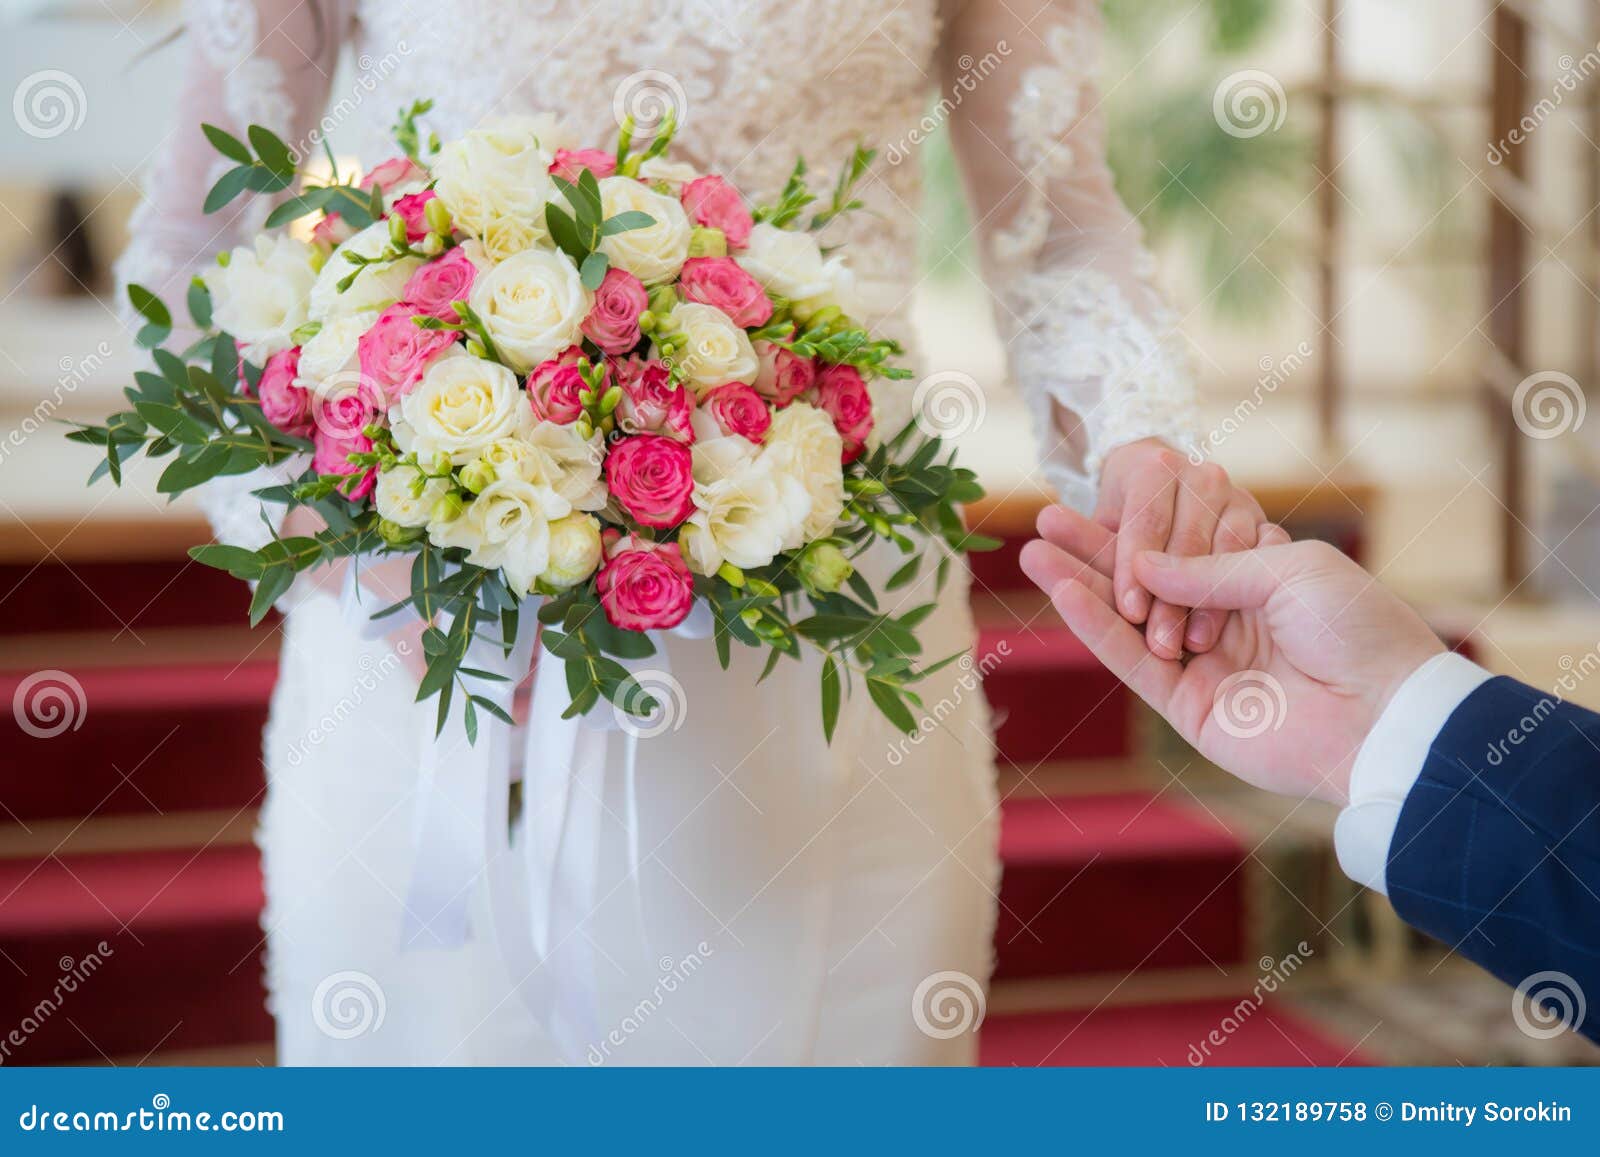 The Bride Gives Her Hand To the Groom. Bride`s Hand Stock Photo - Image ...